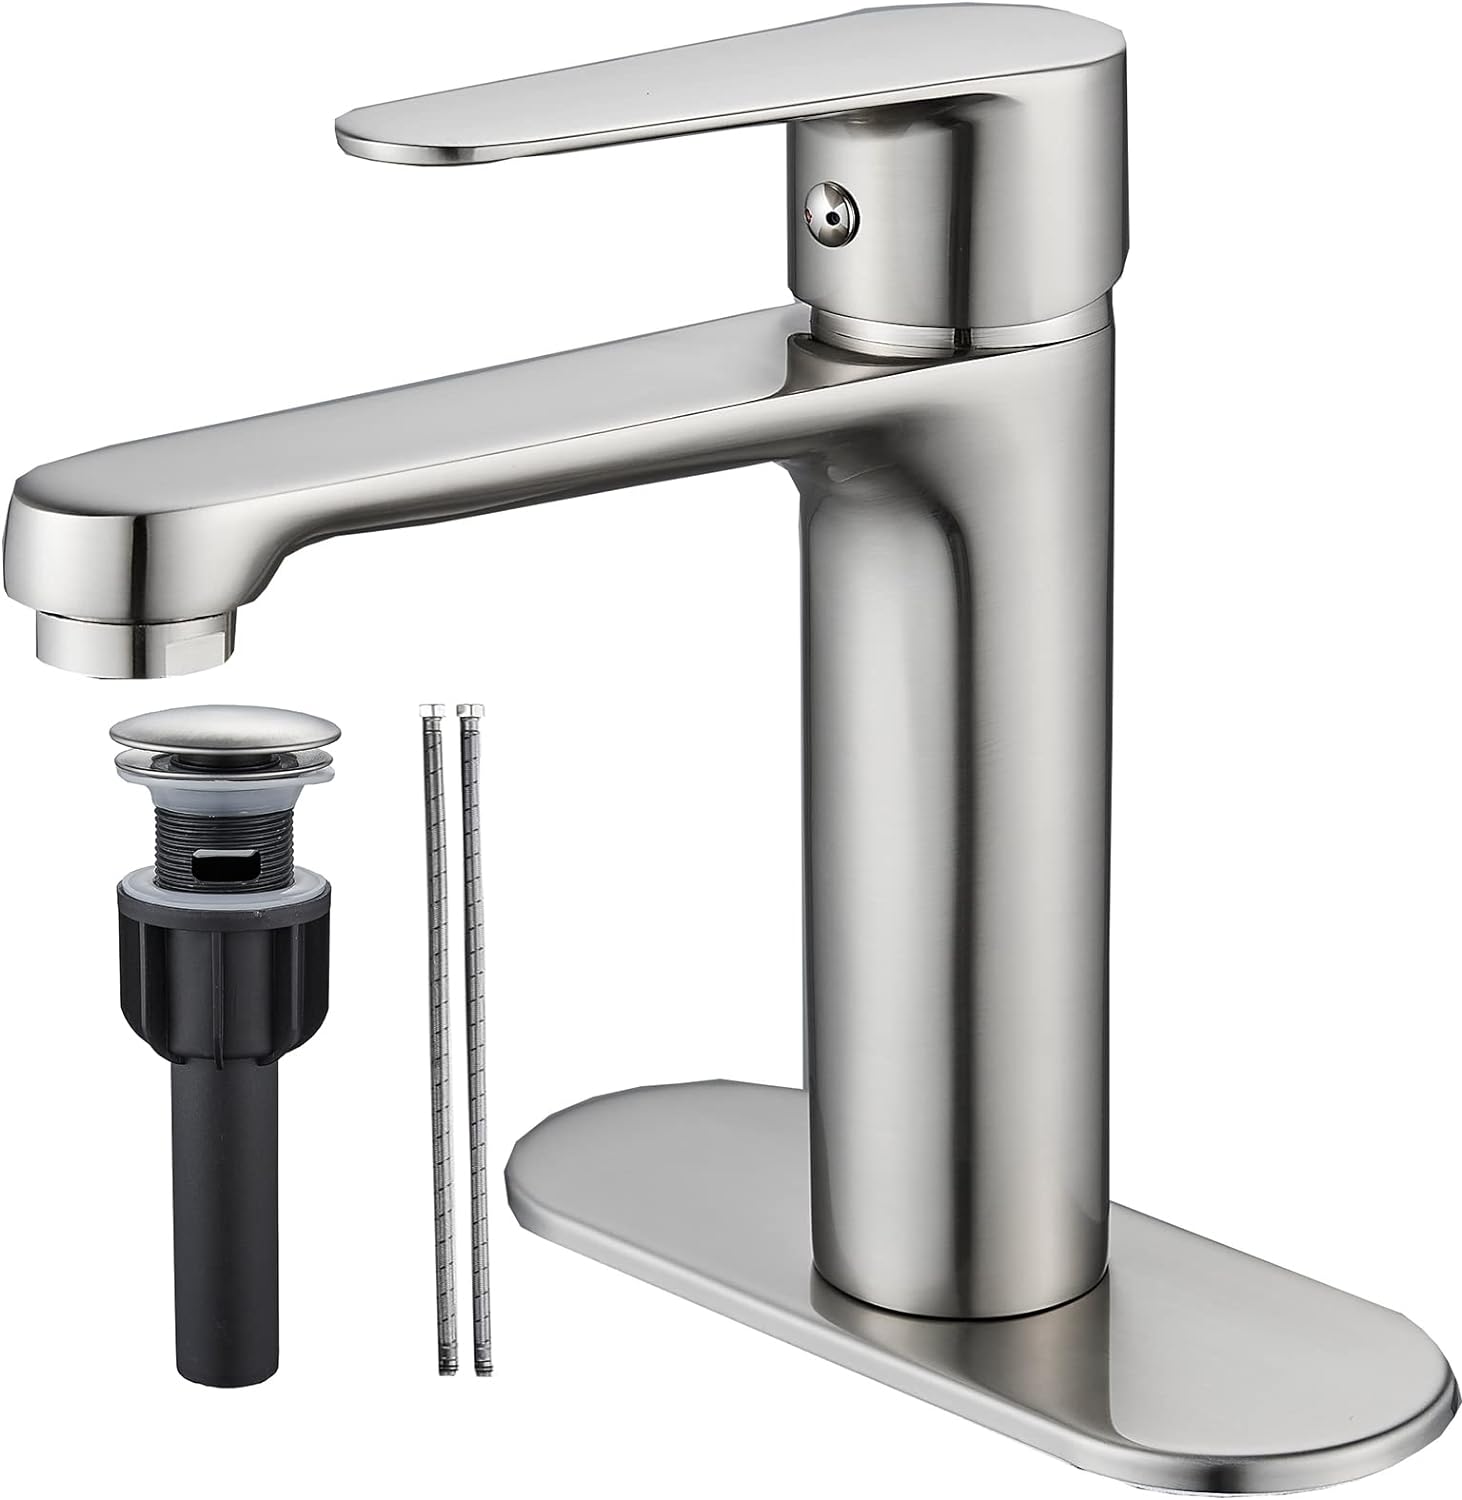 Nickel Brushed Bathroom Sink Faucet Single Hole Single Handle Bathroom Faucet Commercial Fashion Modern Vanity RV Bathroom Faucet with Pop-up Drain Plug Suitable for 1 Hole or 3 Hole Mounting NICTIE